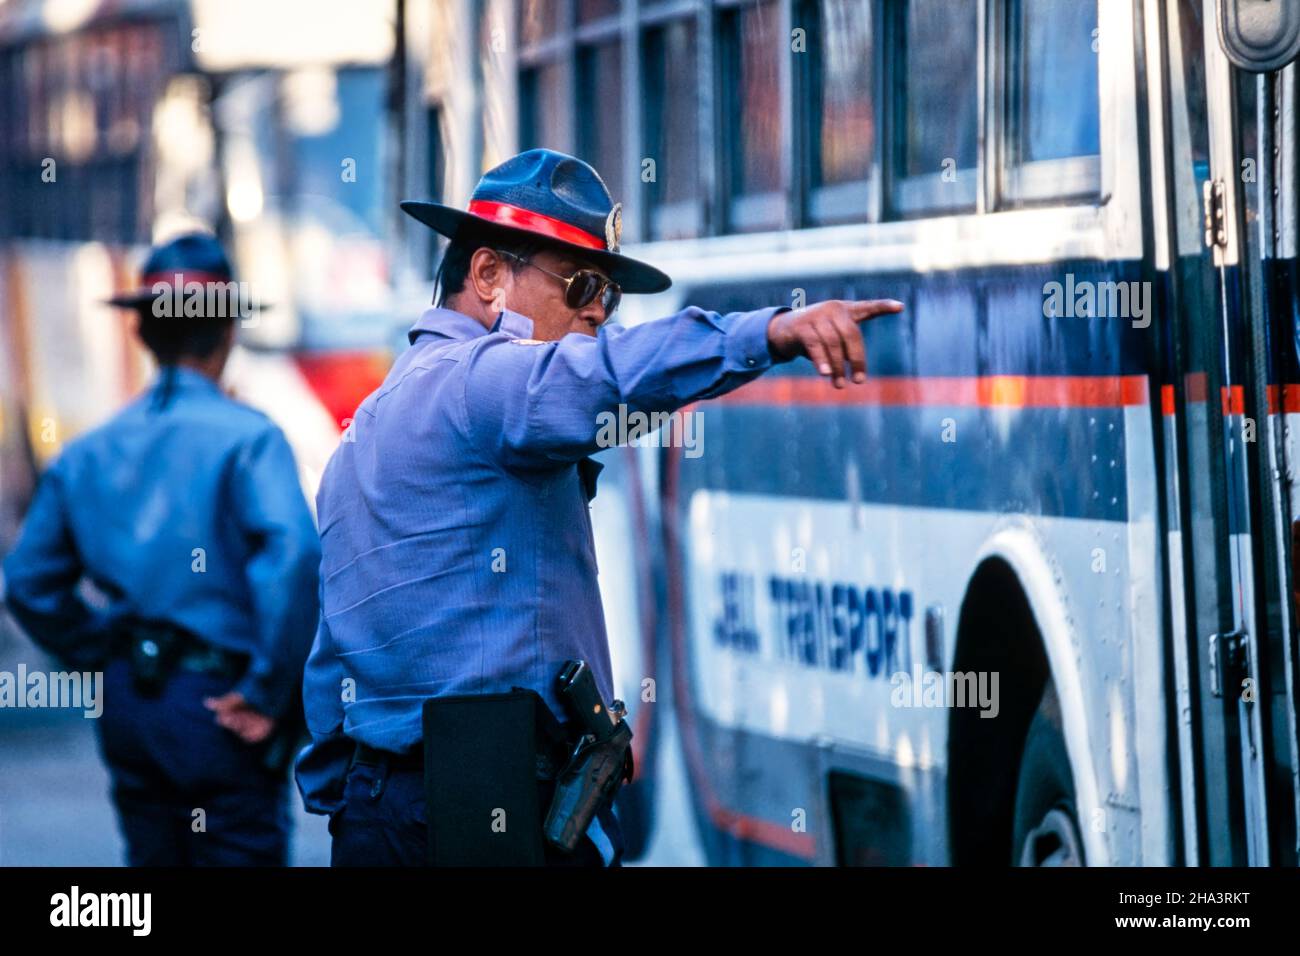 Police officers controlling trafic in city centre, Makati, Manila, Philippines Stock Photo